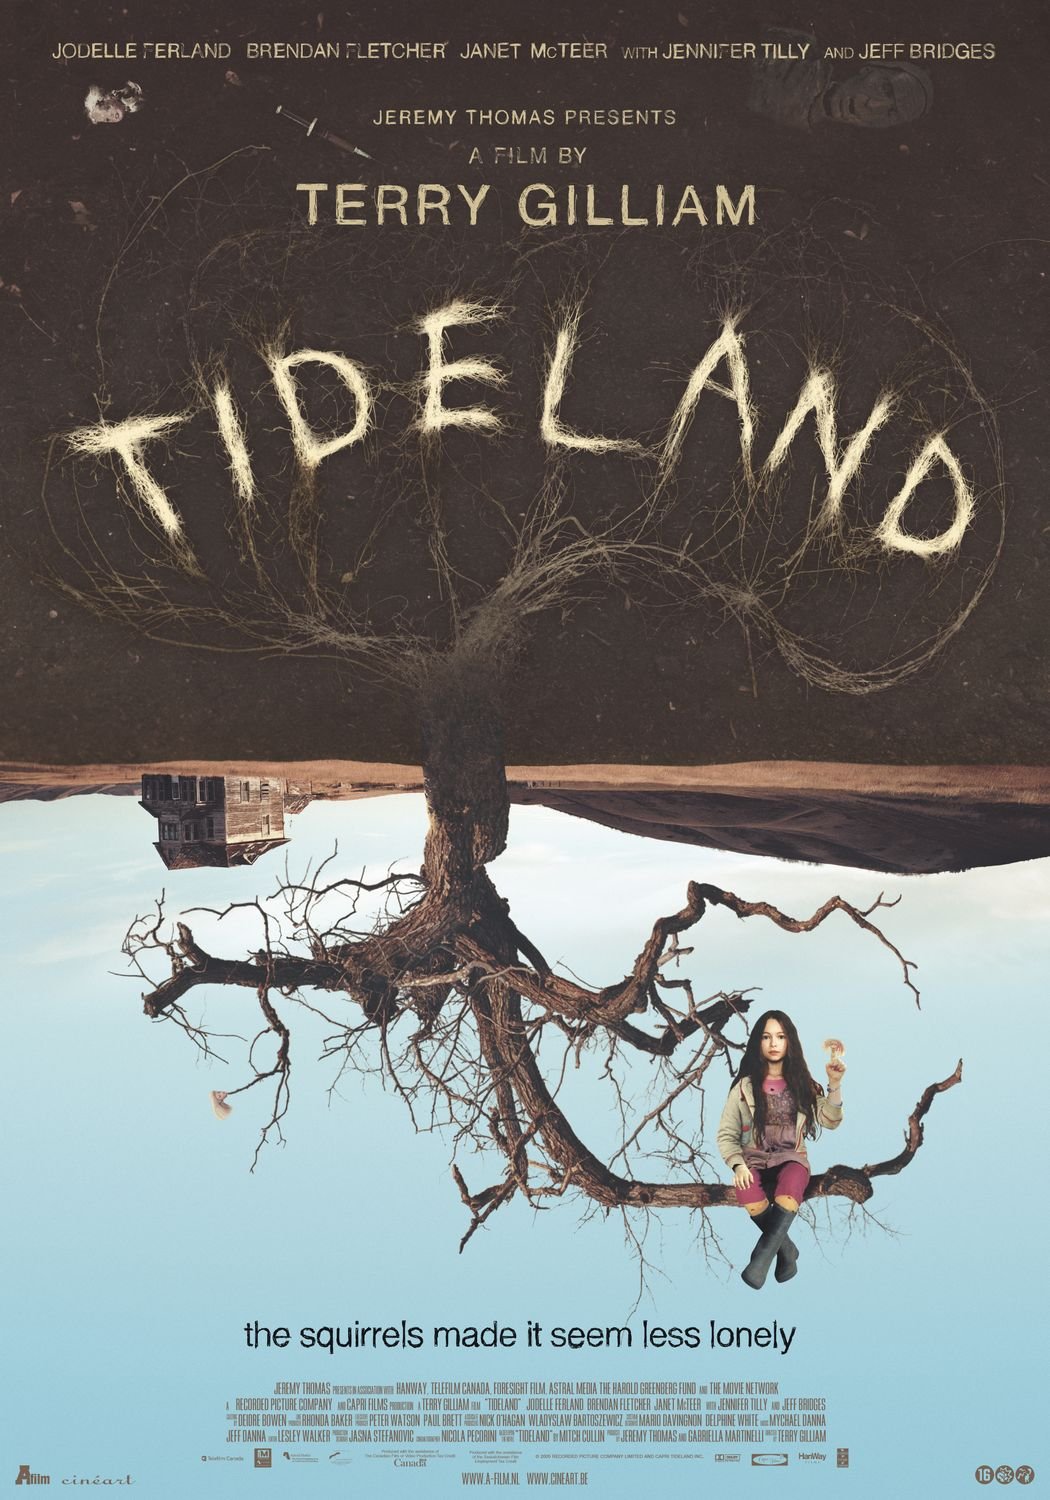 Poster of the movie Tideland